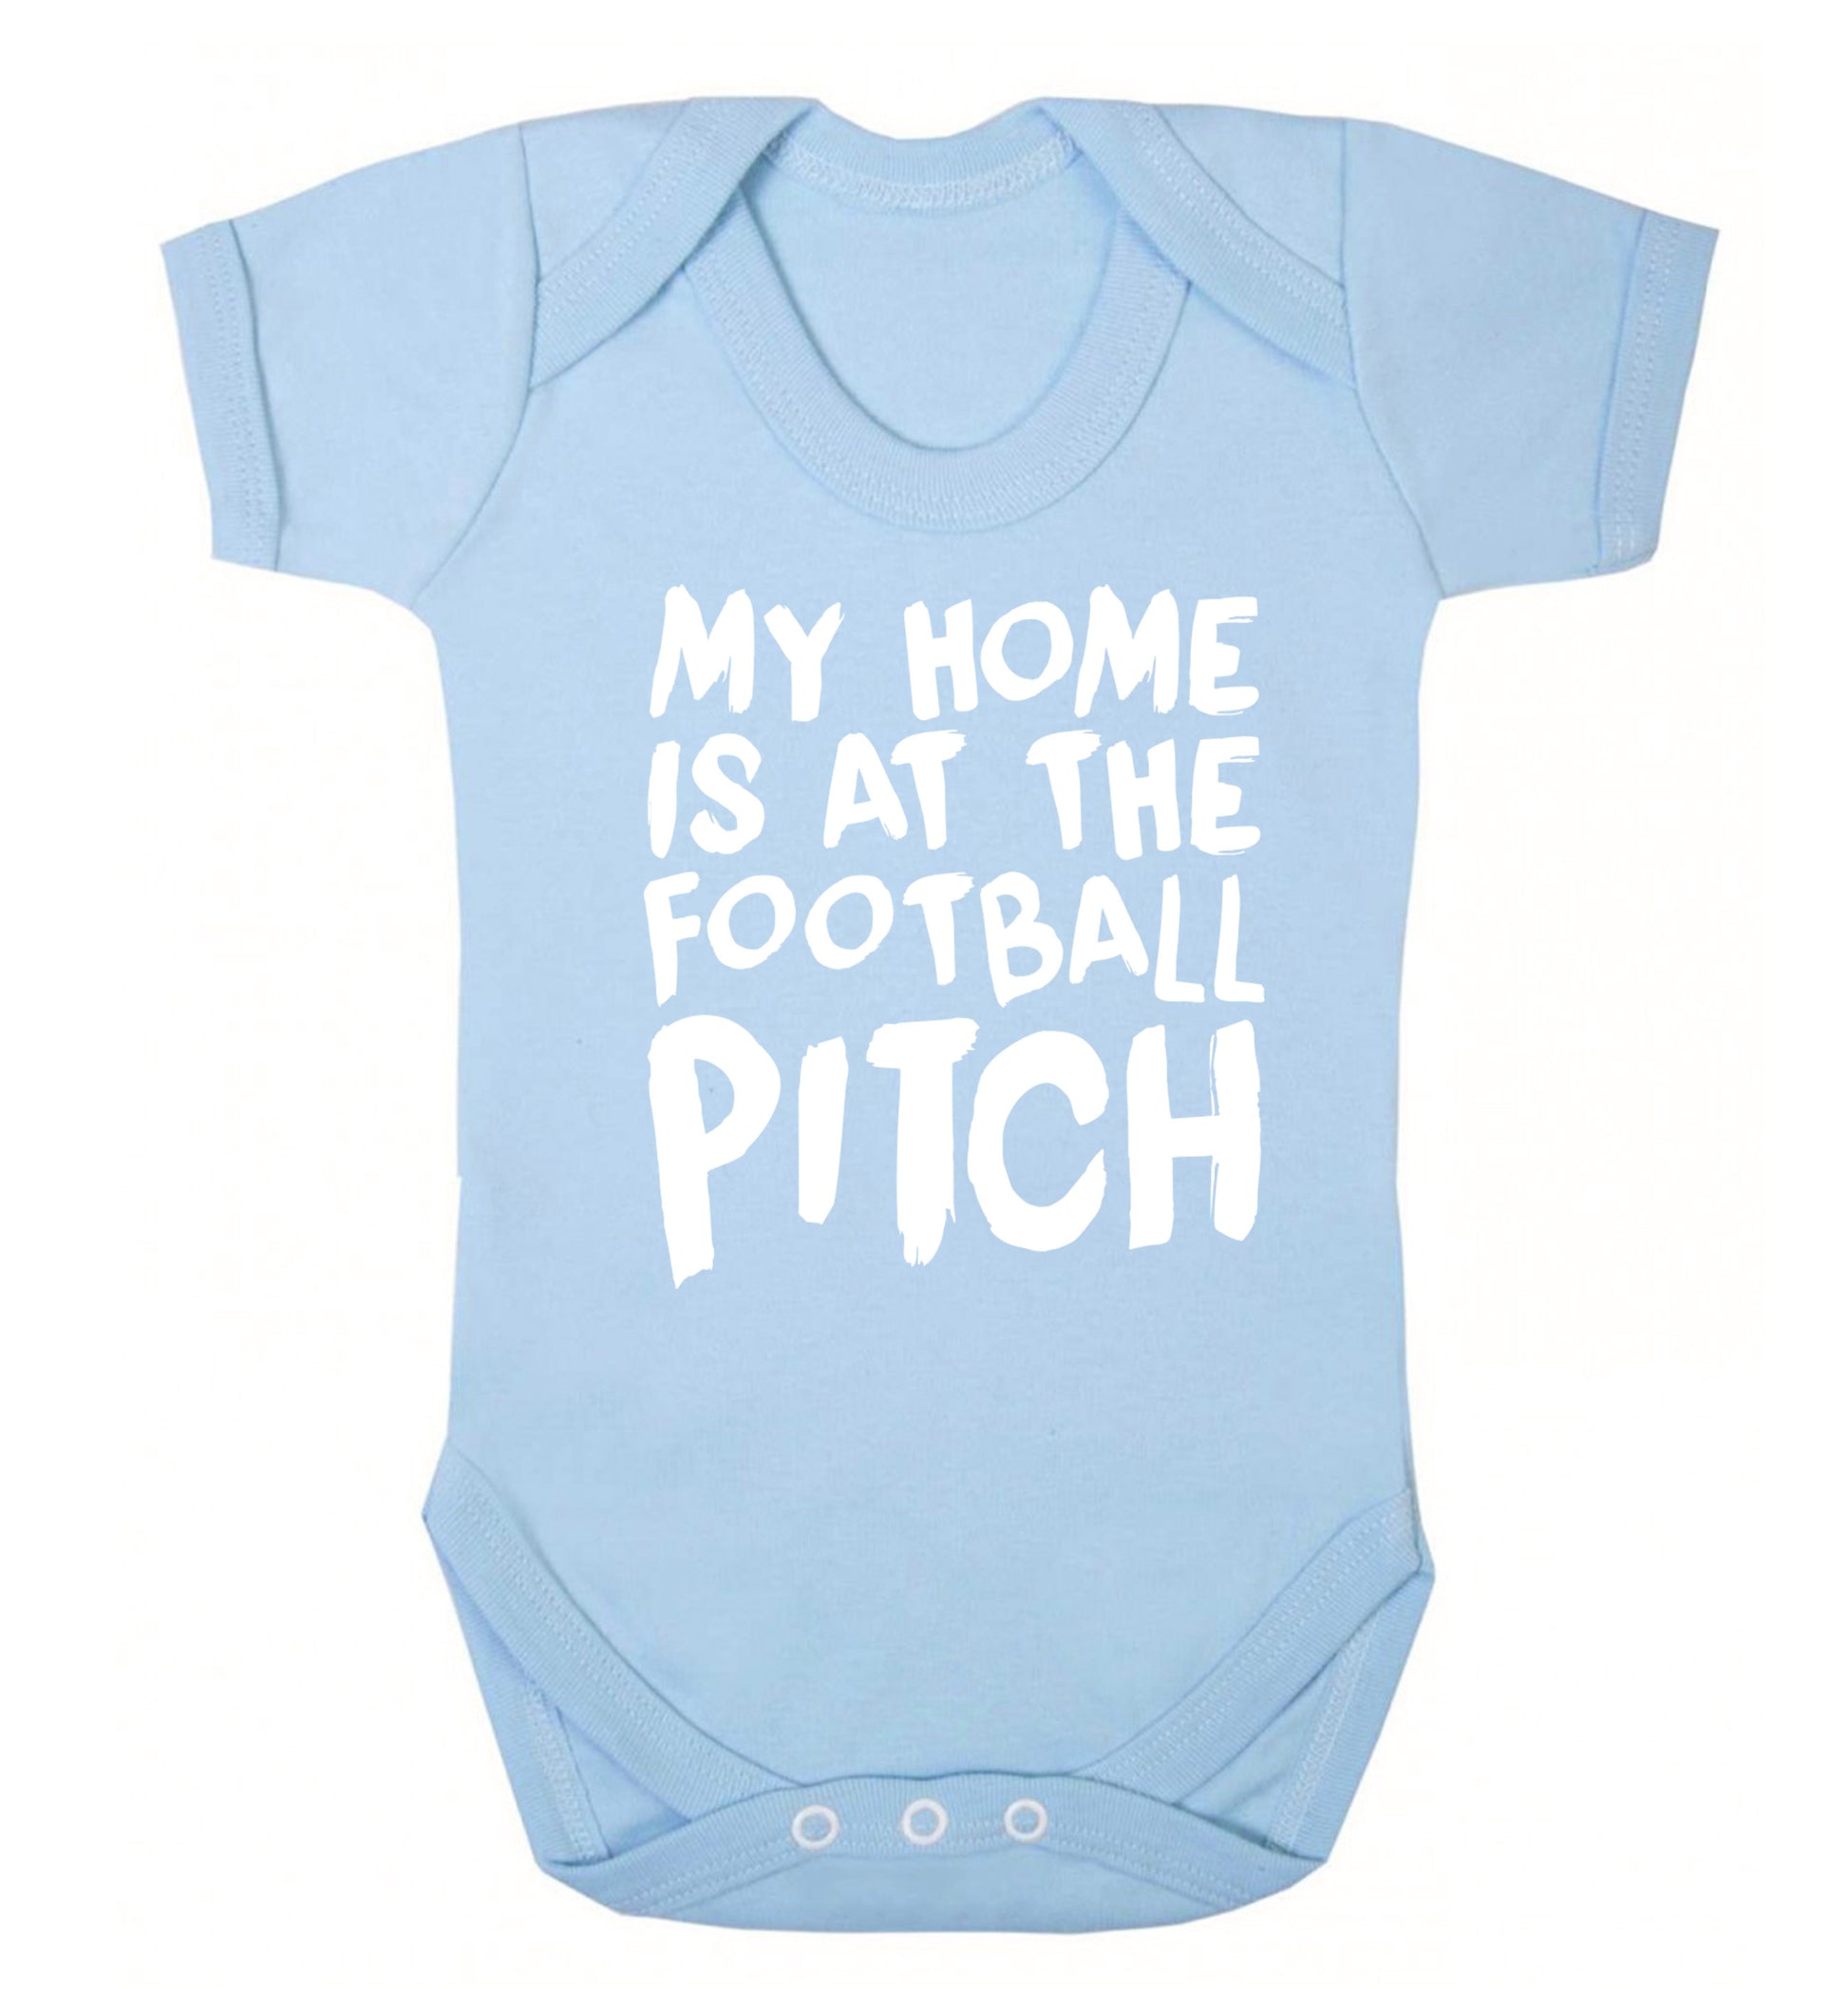 My home is at the football pitch Baby Vest pale blue 18-24 months